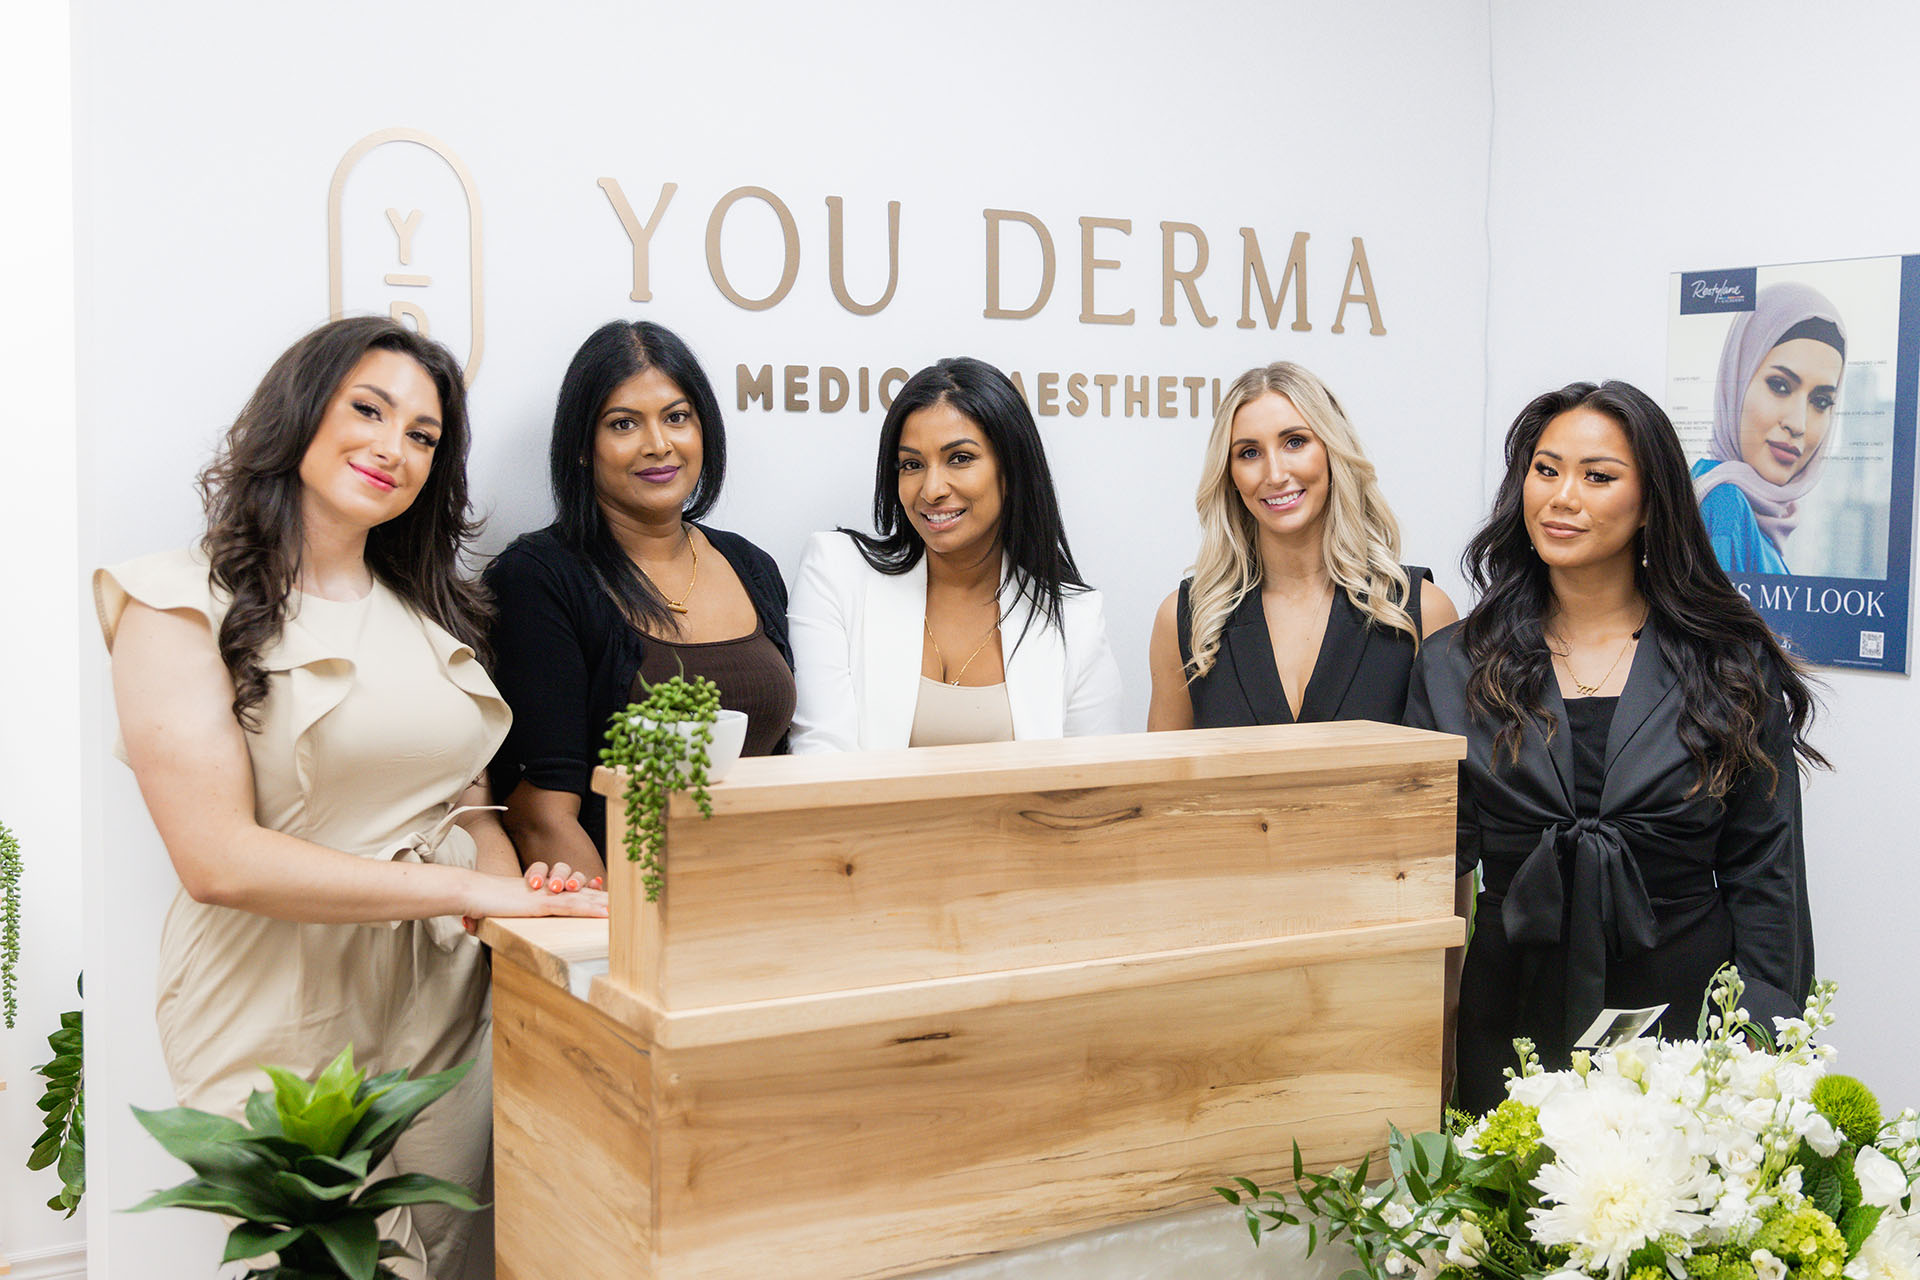 You Derma is a Medical Aesthetics Clinic Serving Ottawa